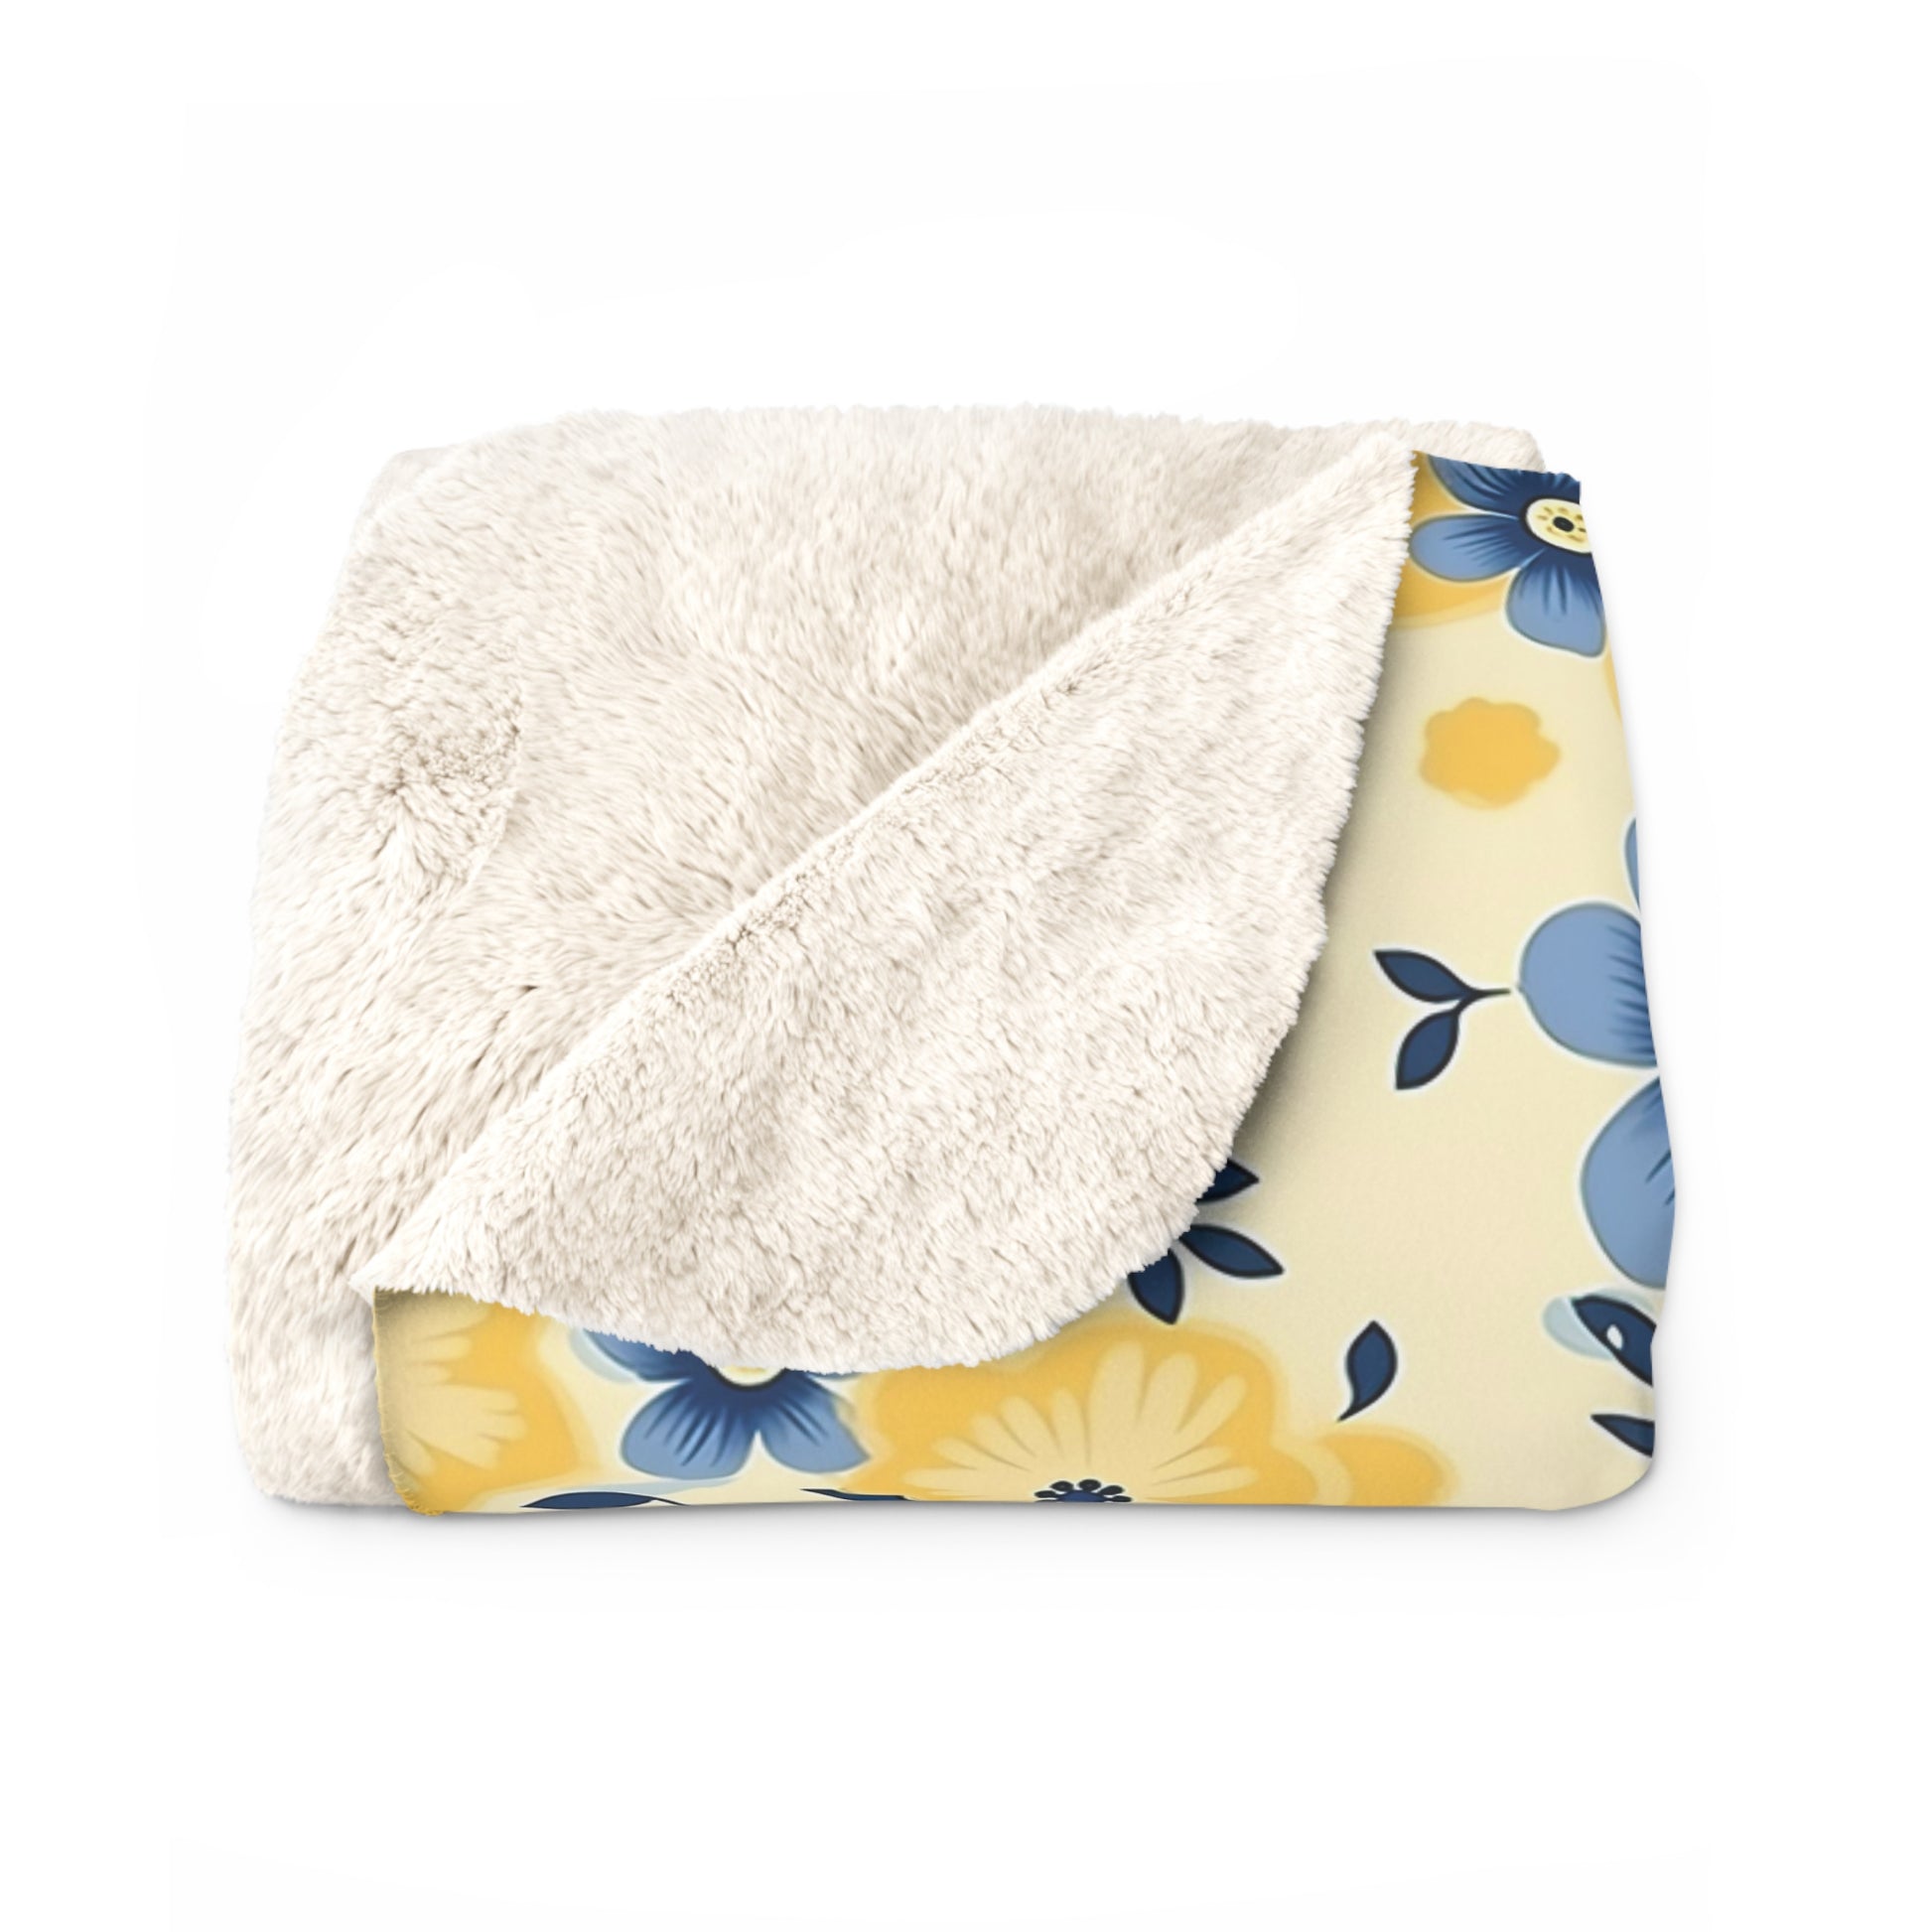 Yellow Watercolor Floral Sherpa - Blue and Yellow Floral Sherpa Blanket